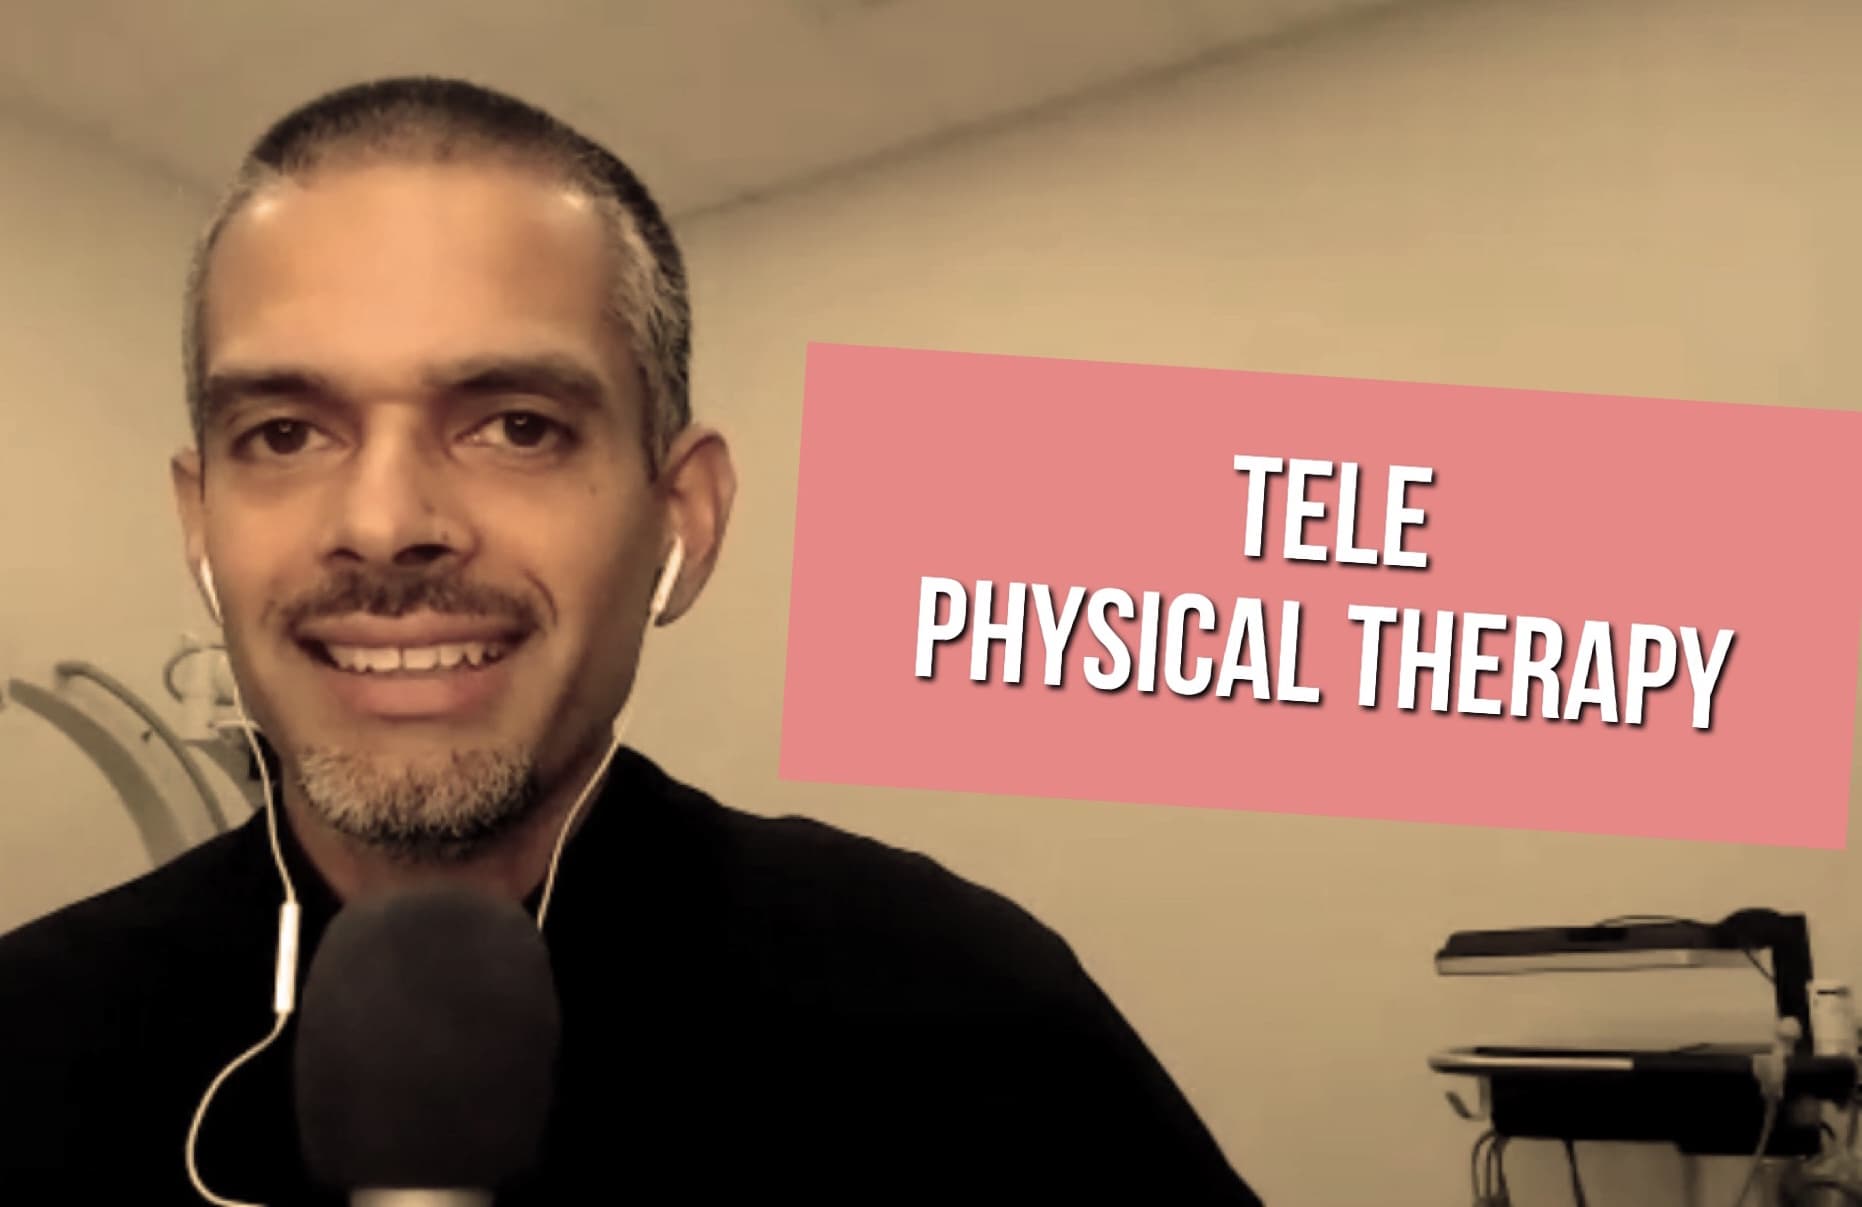 How does Tele Physical Therapy work?